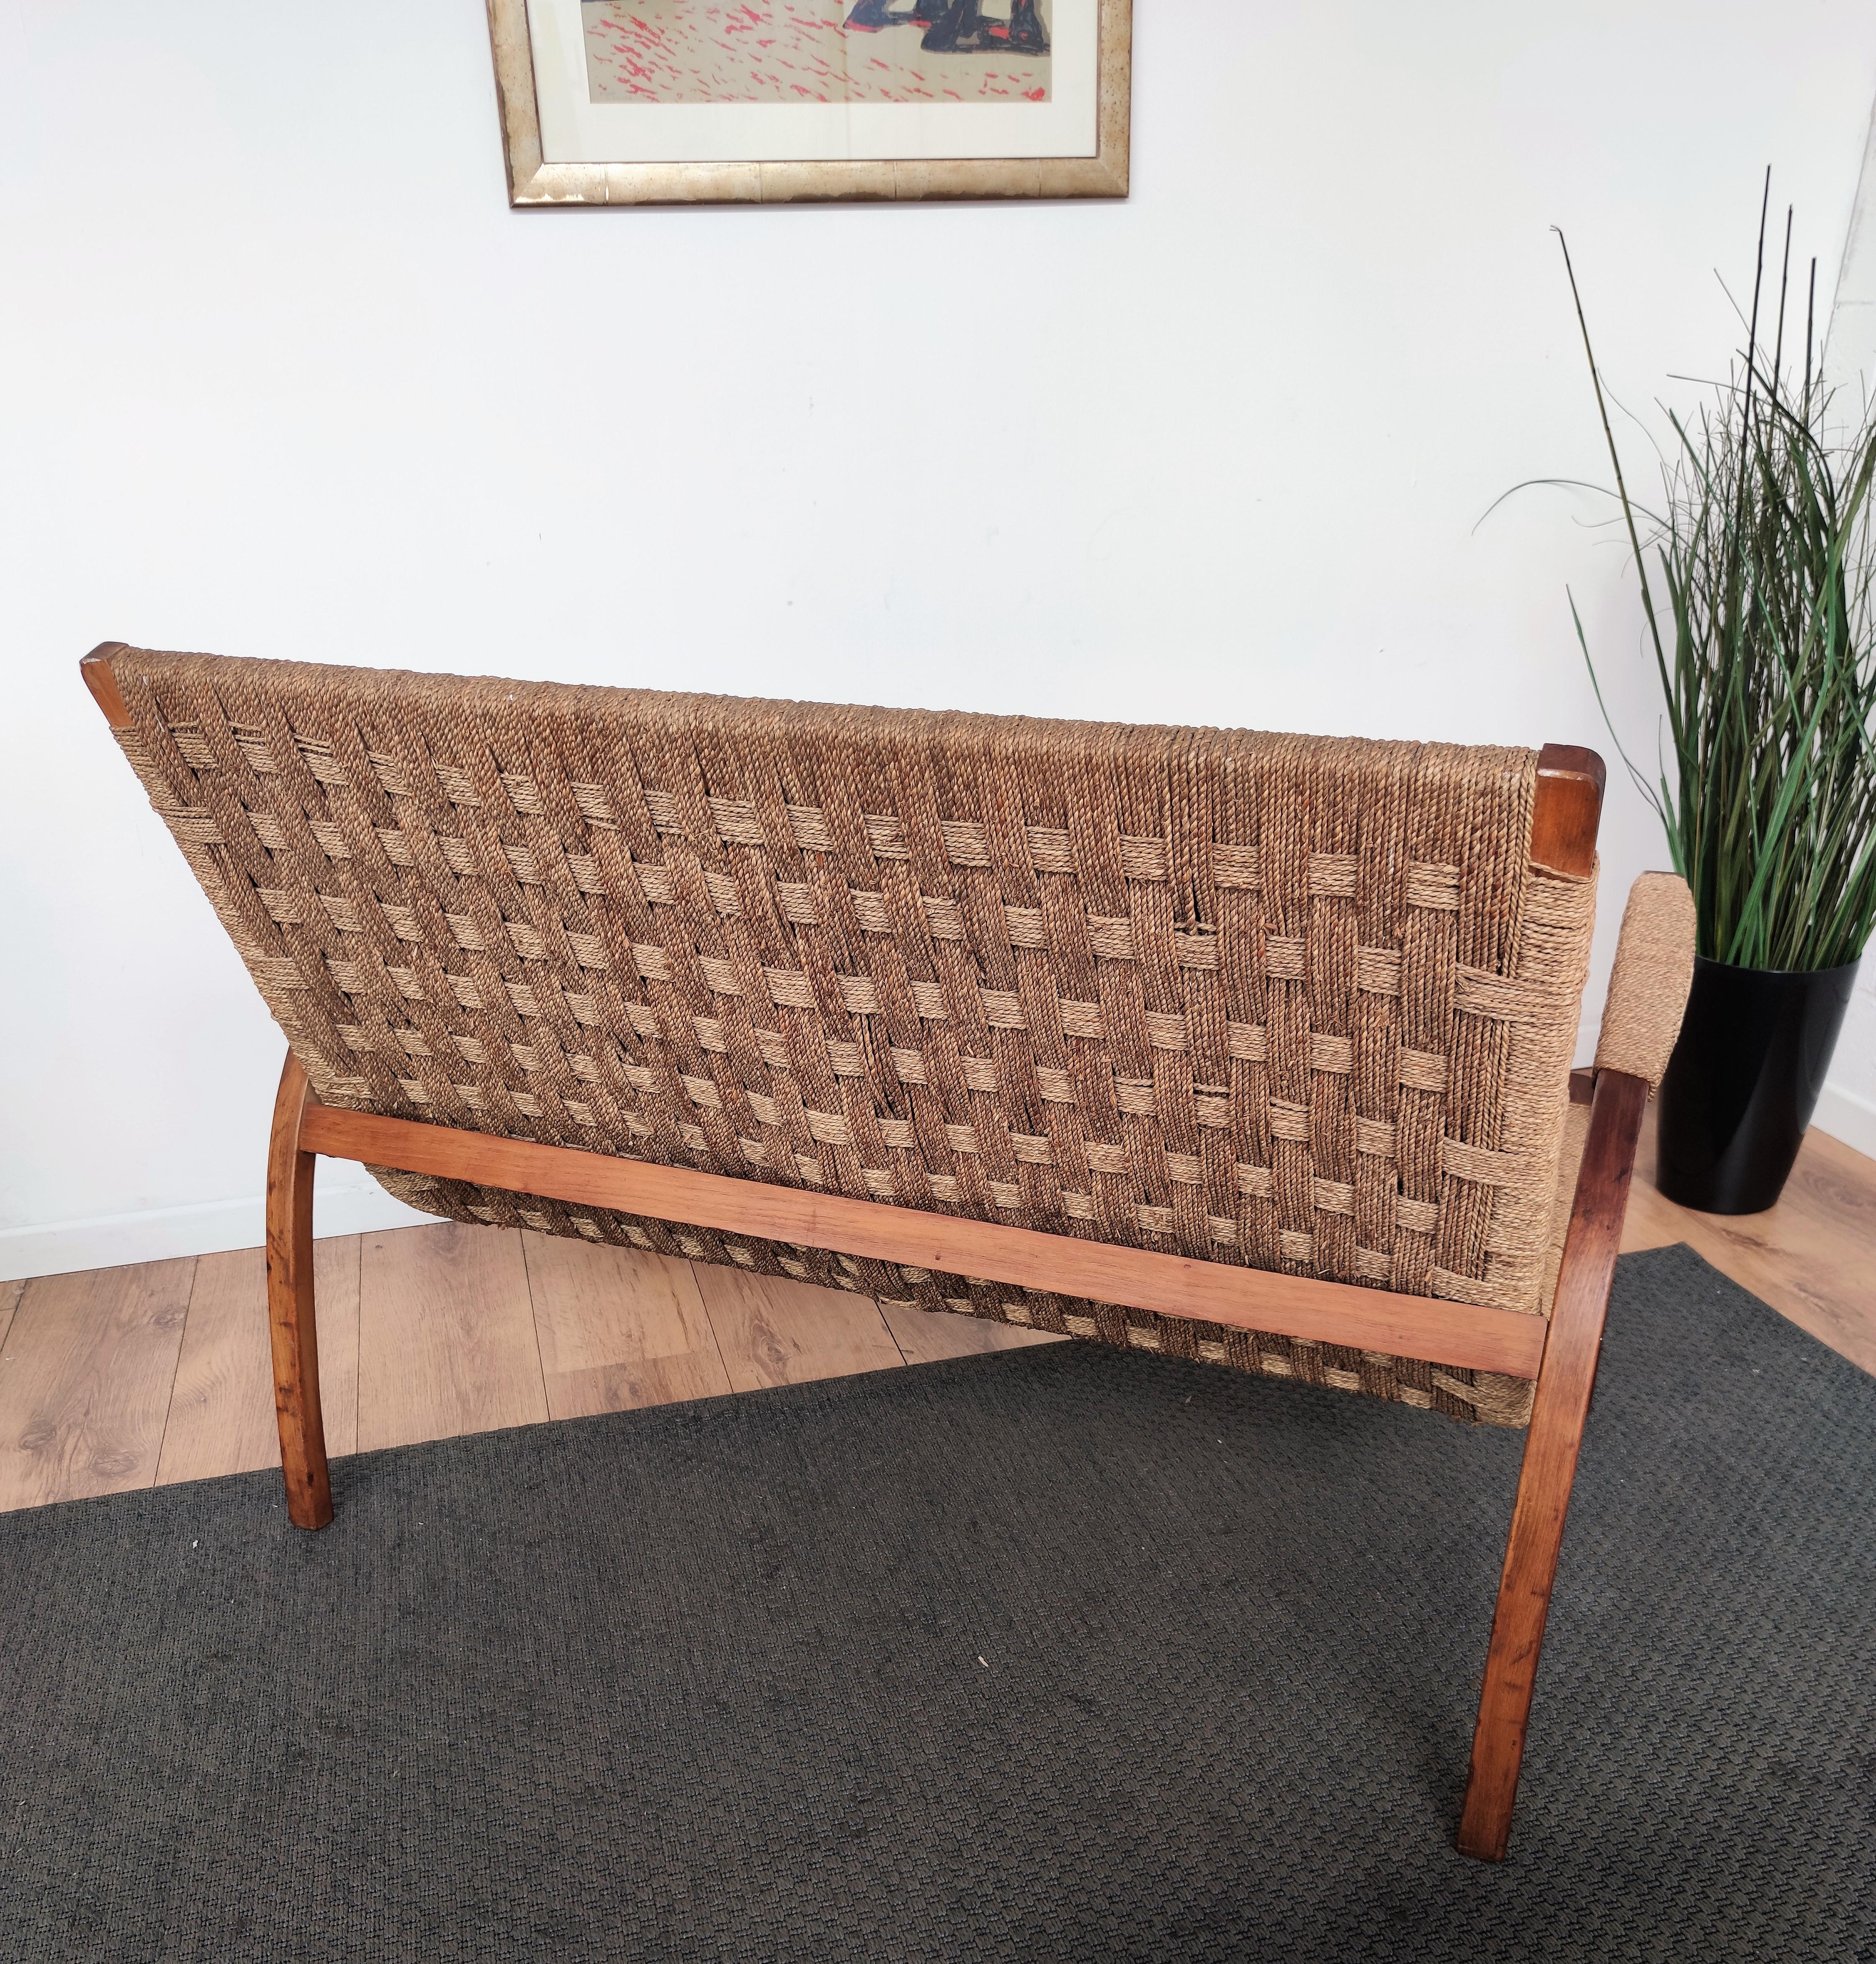 1960s Italian Midcentury Wood and Cord Woven Rope Lounge Bench Armchair For Sale 1